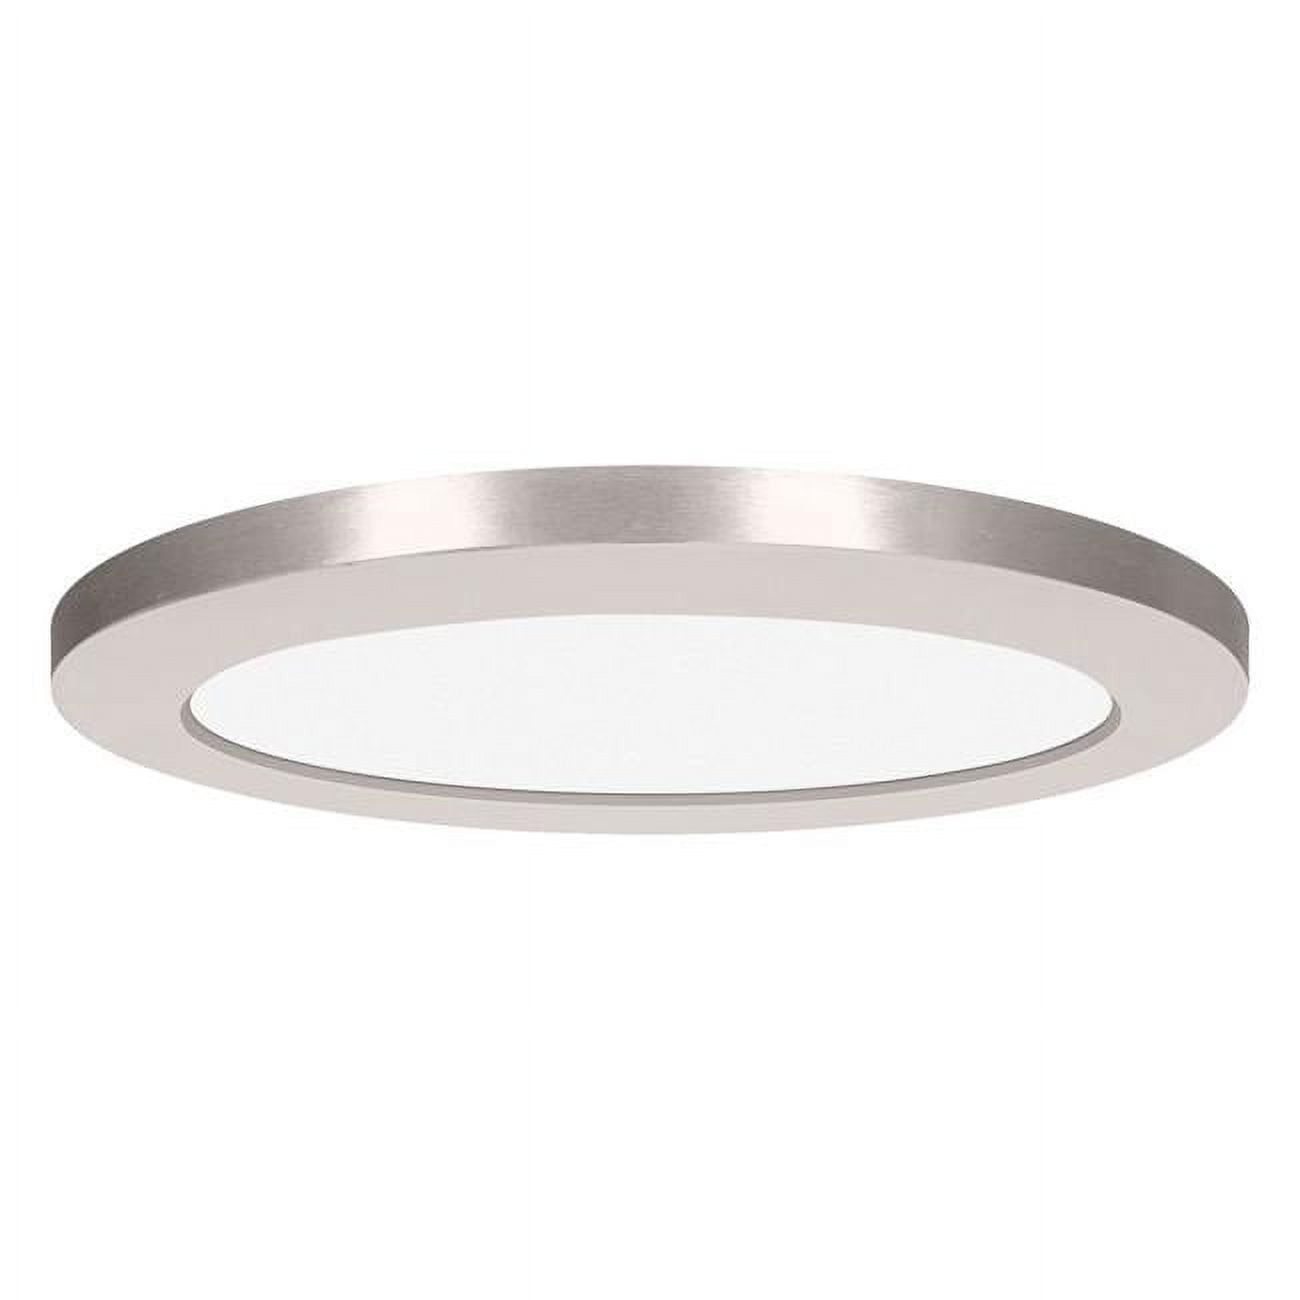 Picture of Access Lighting 20831TRIM-BS 9 in. ModPLUS Brushed Steel Trim Recessed for 20831 & 20837